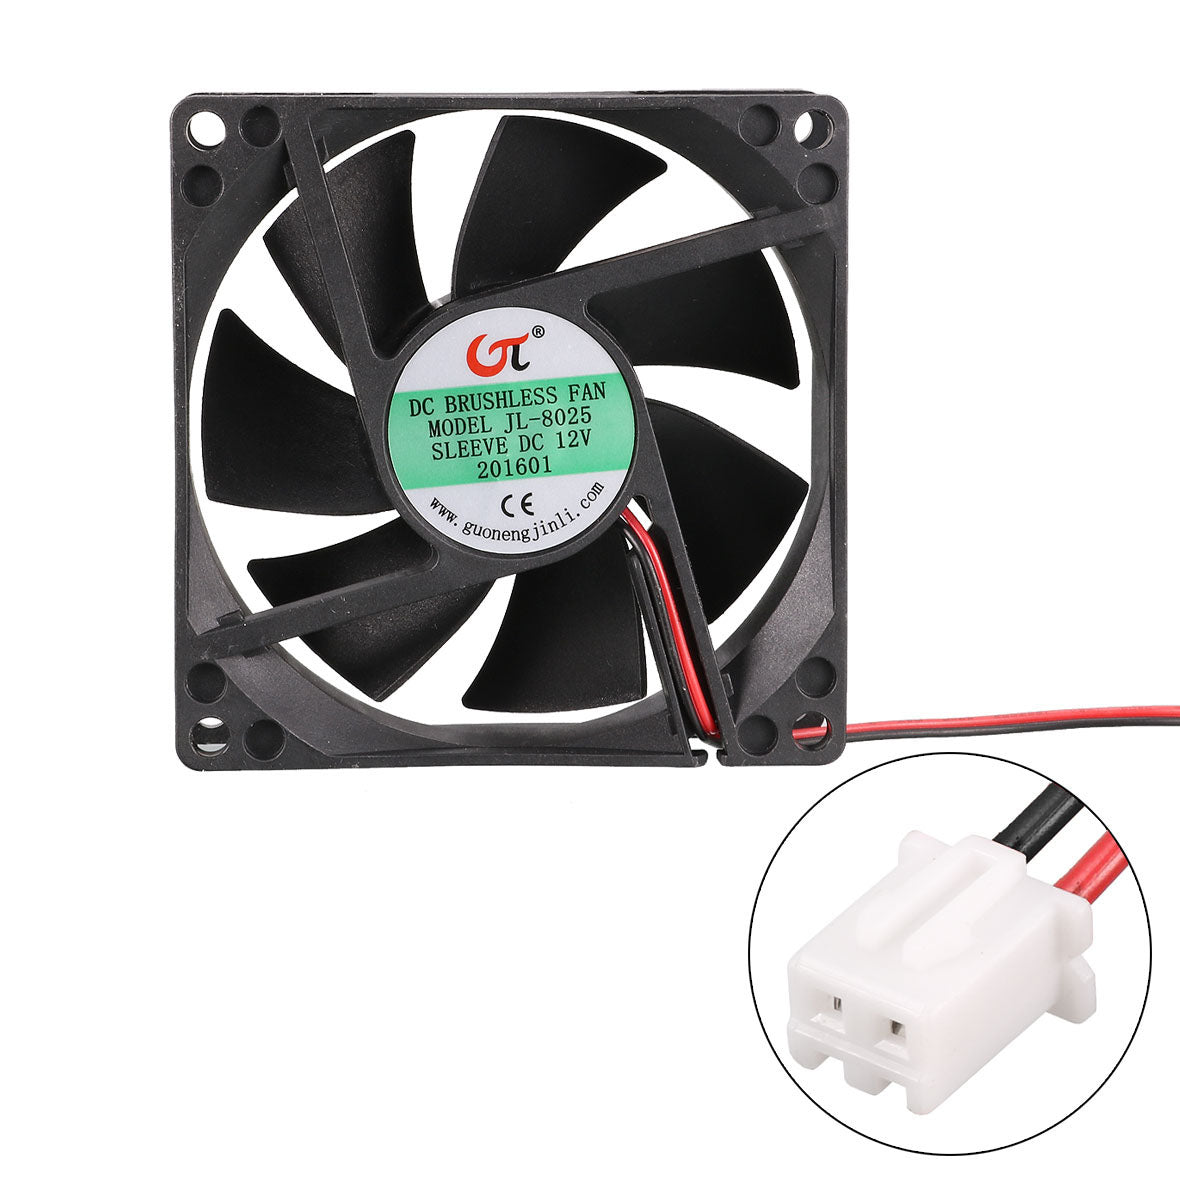 uxcell Uxcell 80mm x 80mm x 25mm 12V DC Cooling Fan Long Life Sleeve Bearing Computer Case Fan